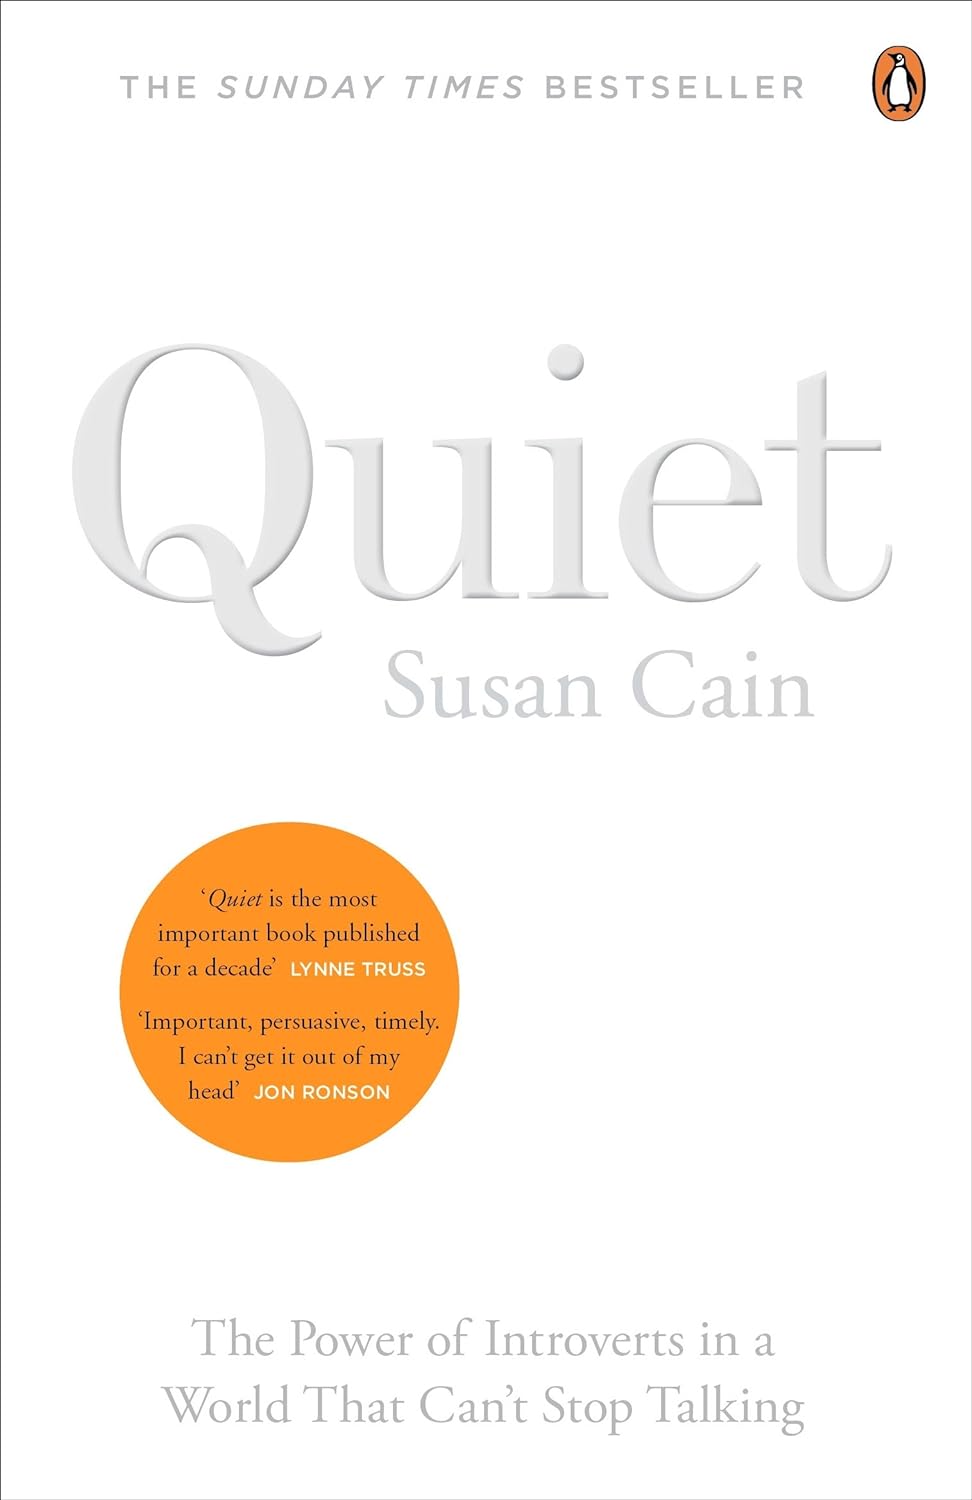 Book Cover - Quiet The Power of Introverts in a World That Can't Stop Talking by Susan Cain